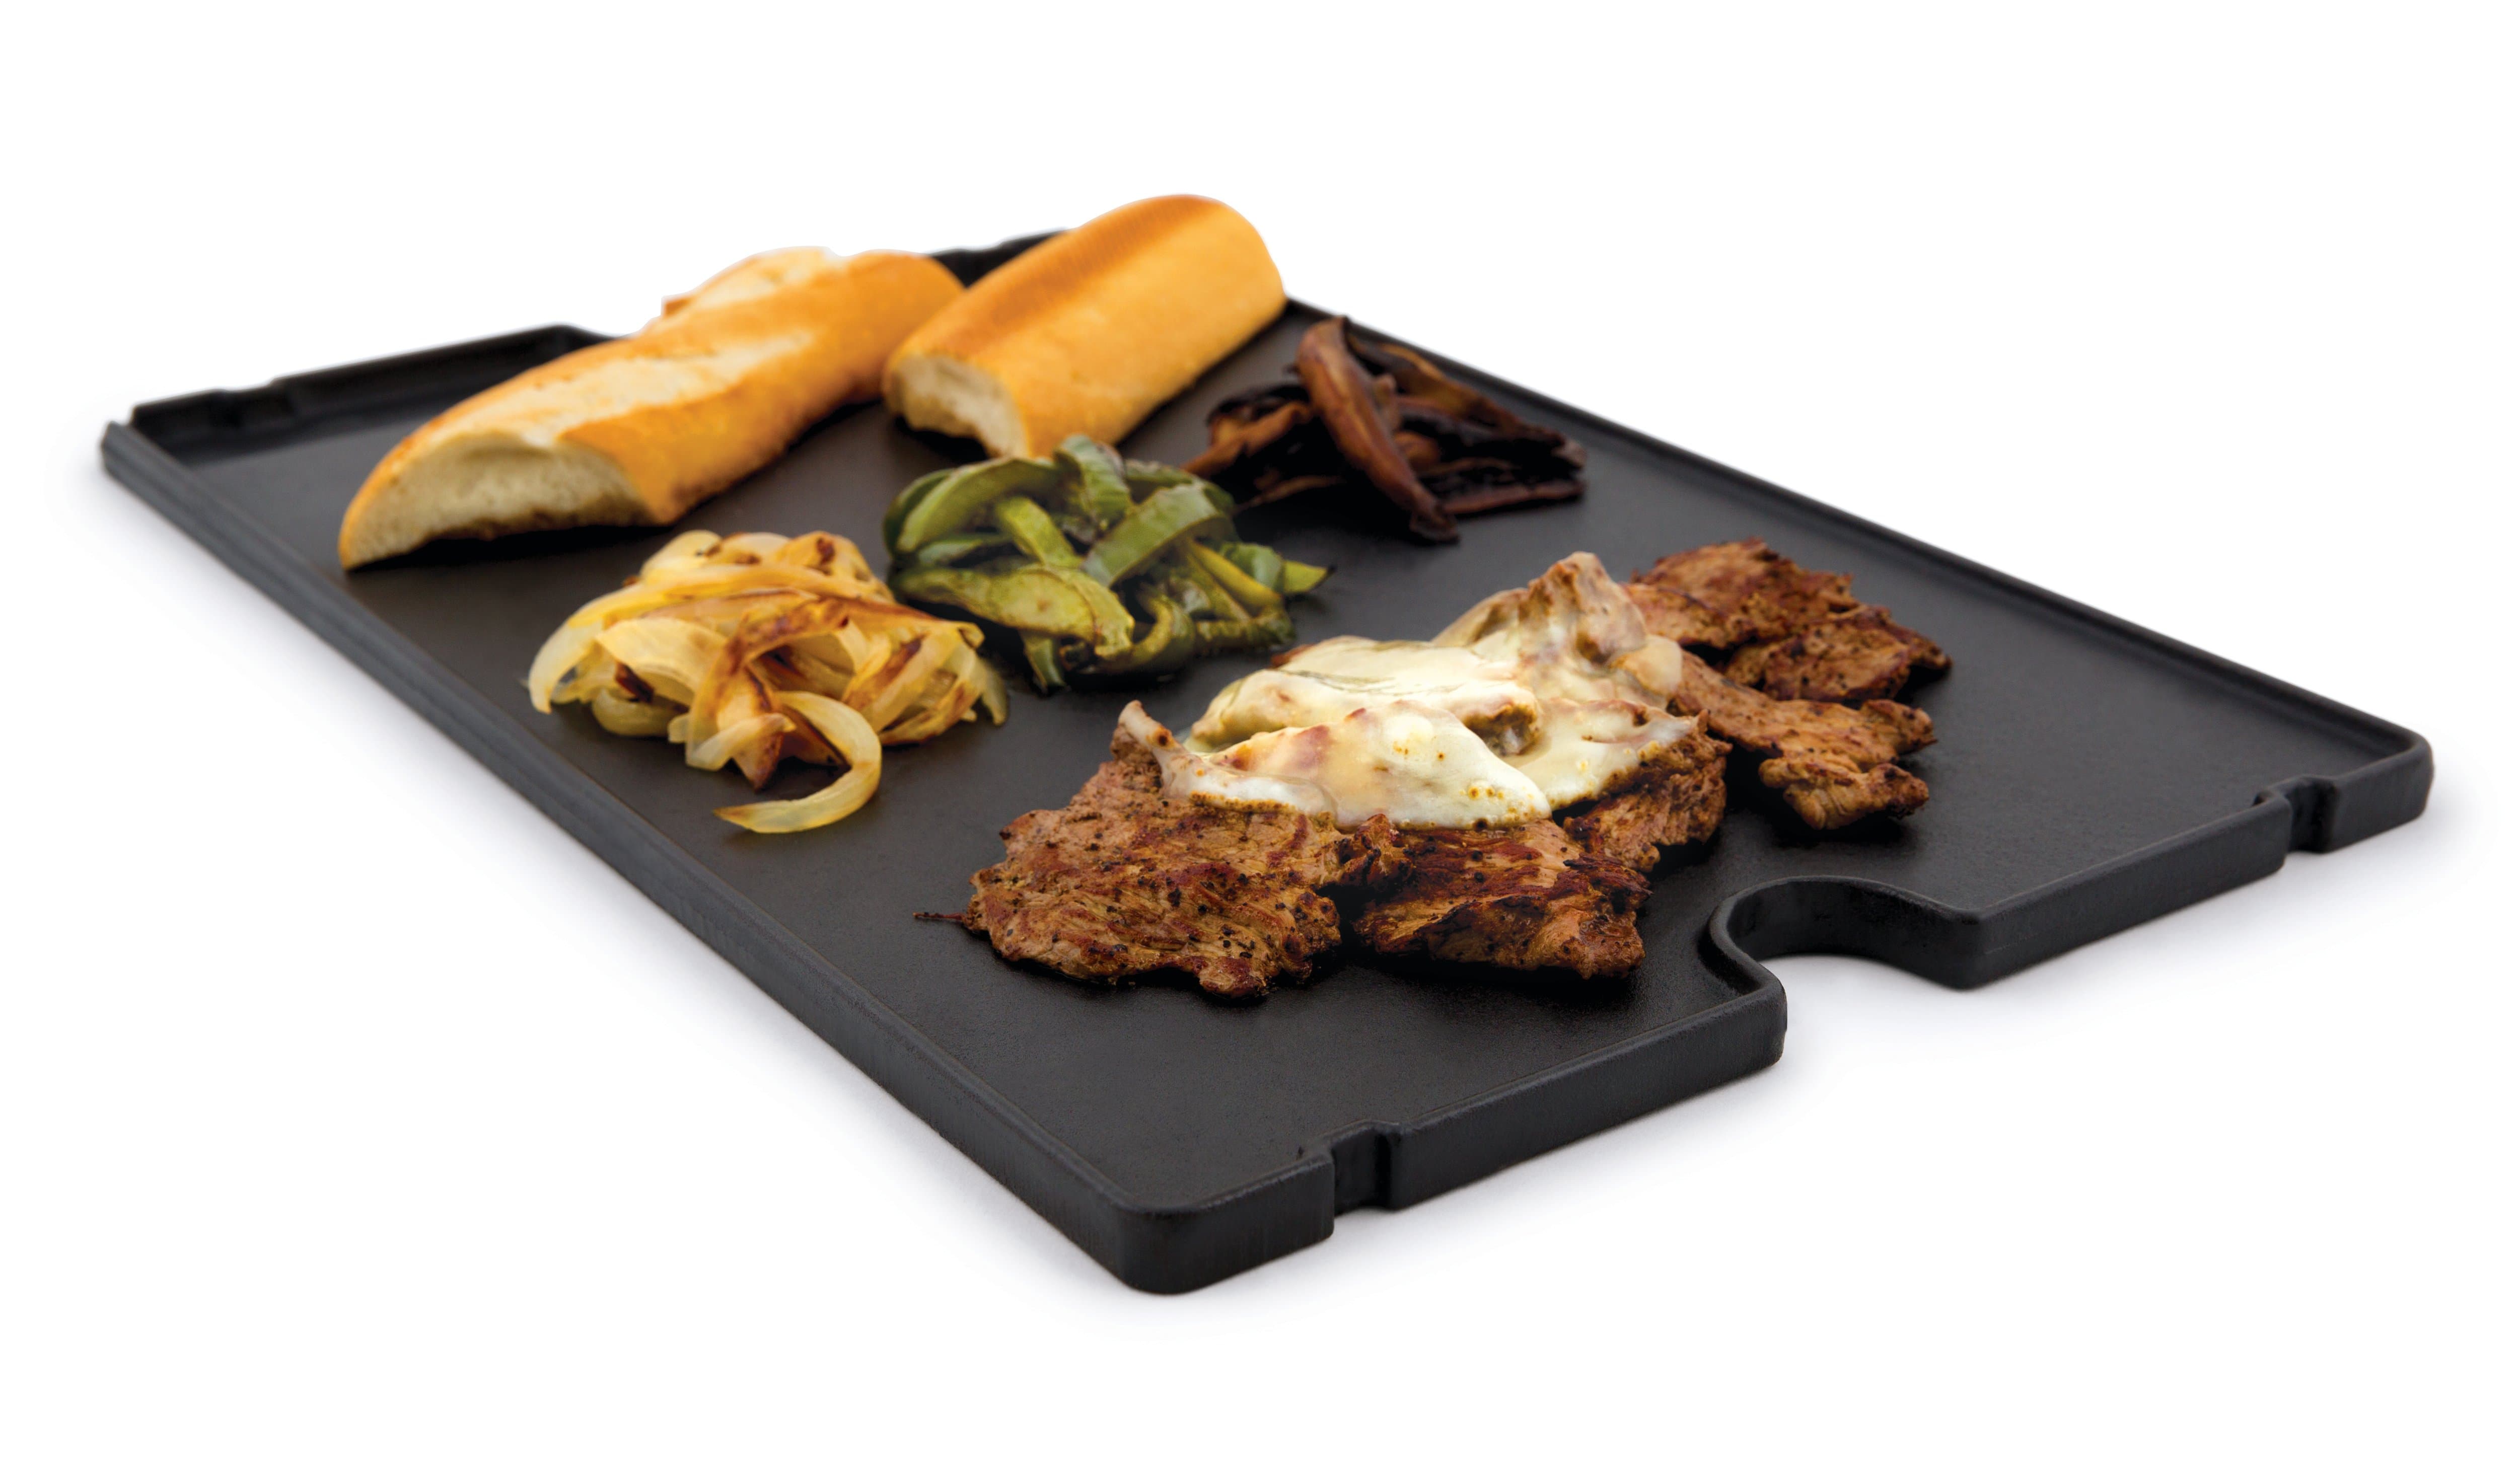 Broil King Broil King Accessories GRIDDLE - BARON - CAST IRON